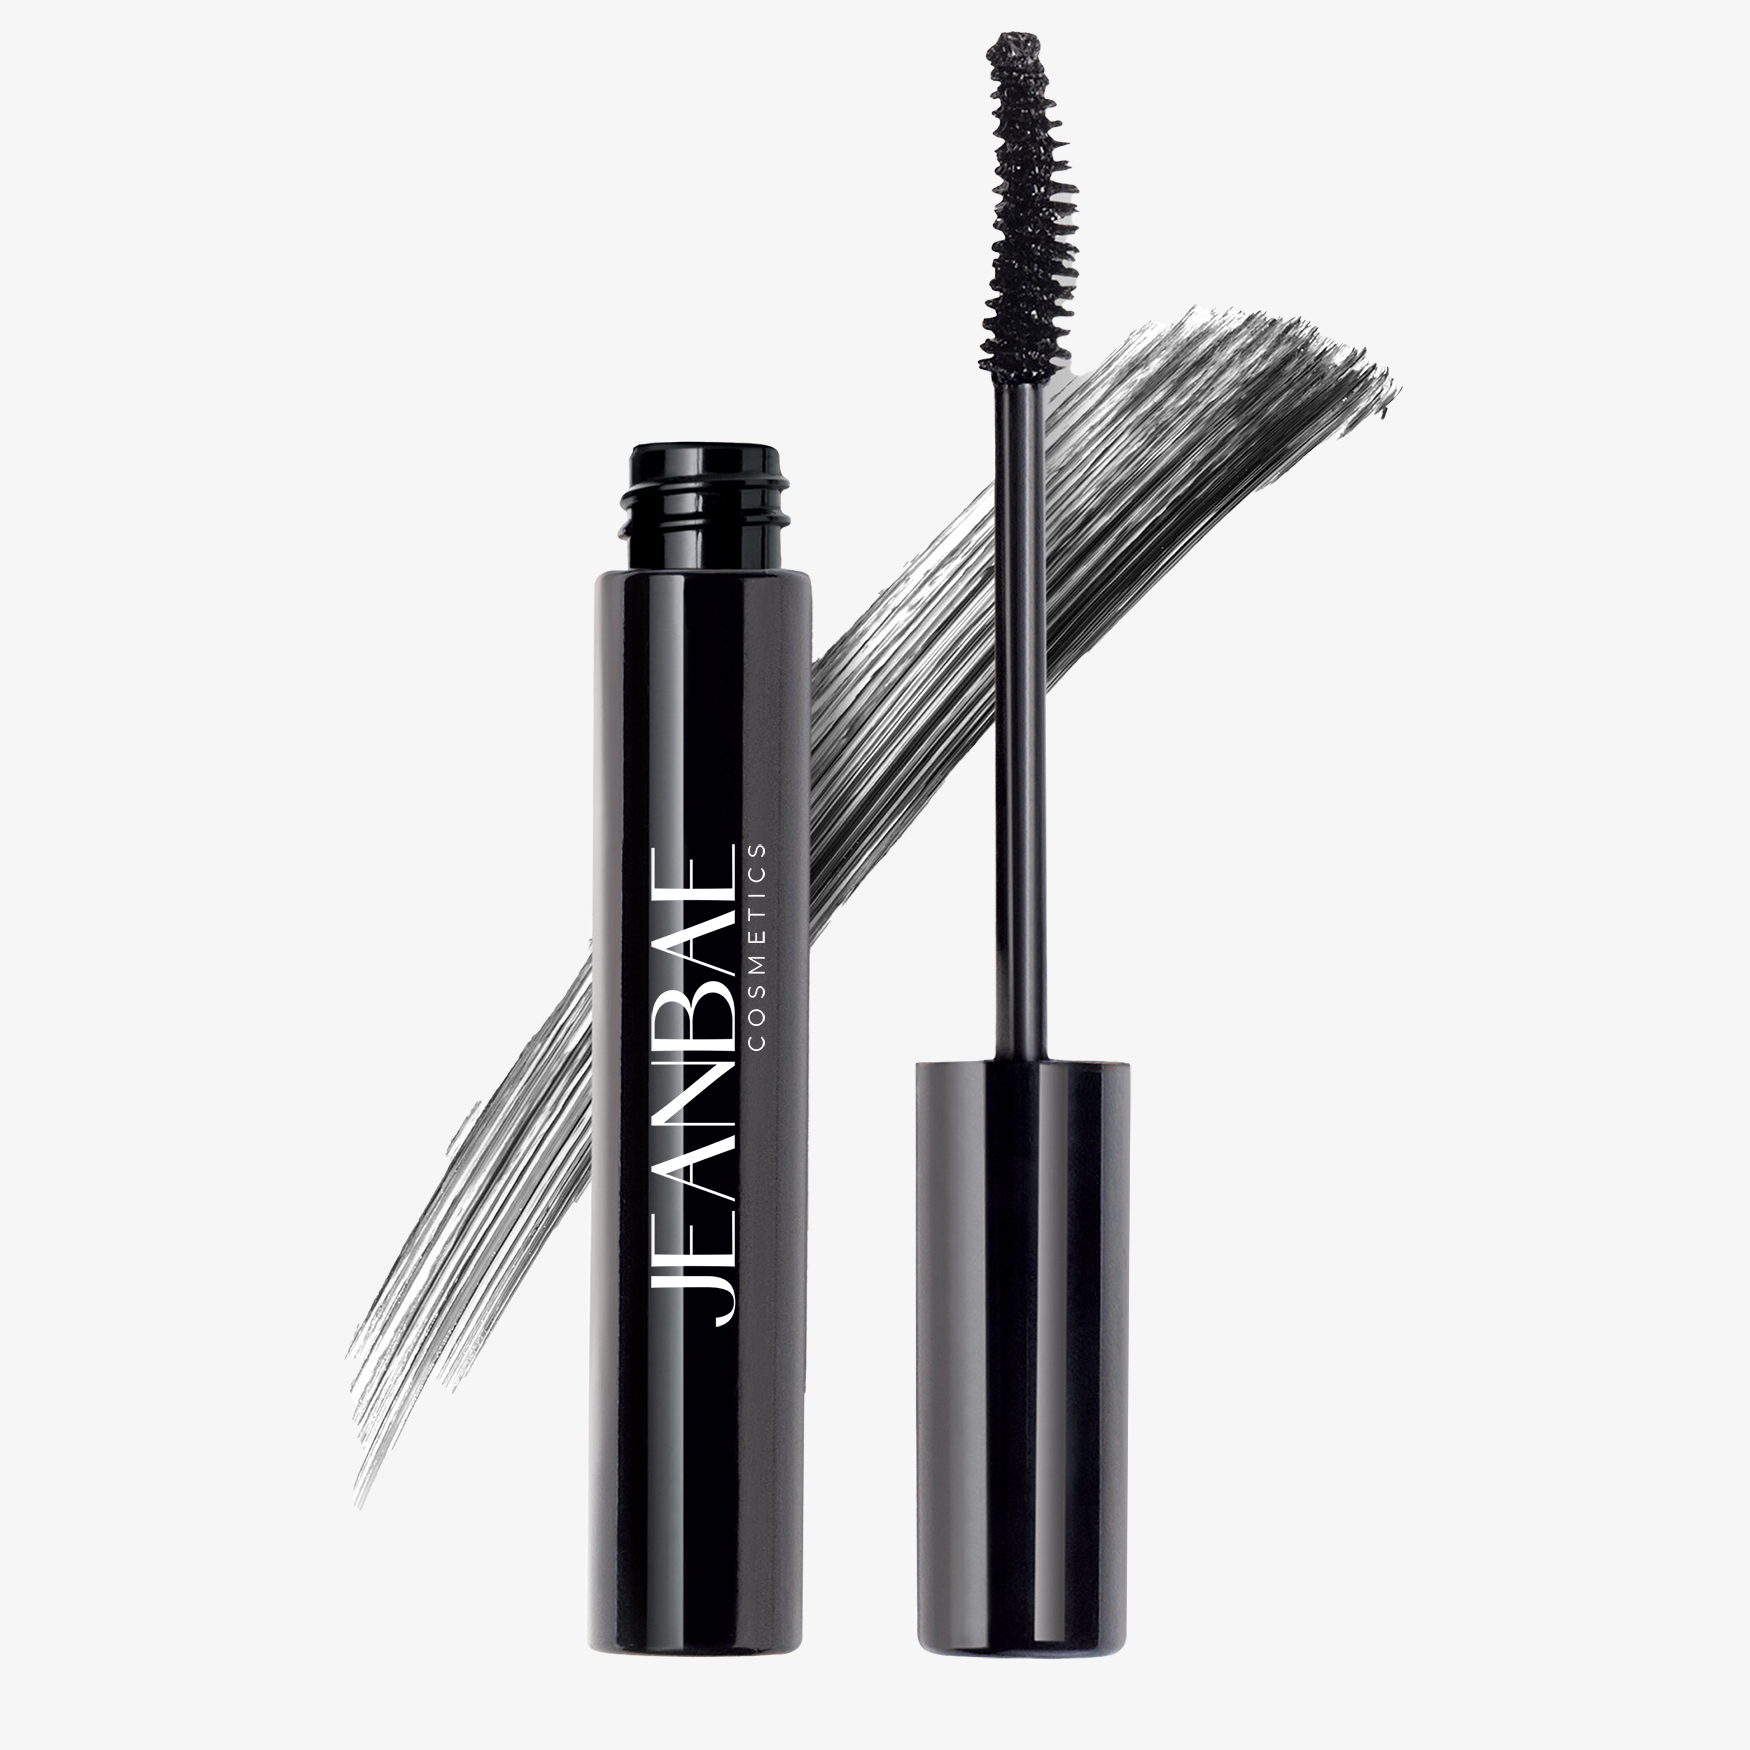 This splash-proof 4-in-1 formula creates lush, long, non-clumping lashes.  THIS PRODUCT IS Cruelty-Free, E.U. Registered, and Made in the USA. Formulated without Alcohol, Barley, Corn, Oats, Rye, Soy, Spelt or Wheat Free Of Parabens or Gluten.